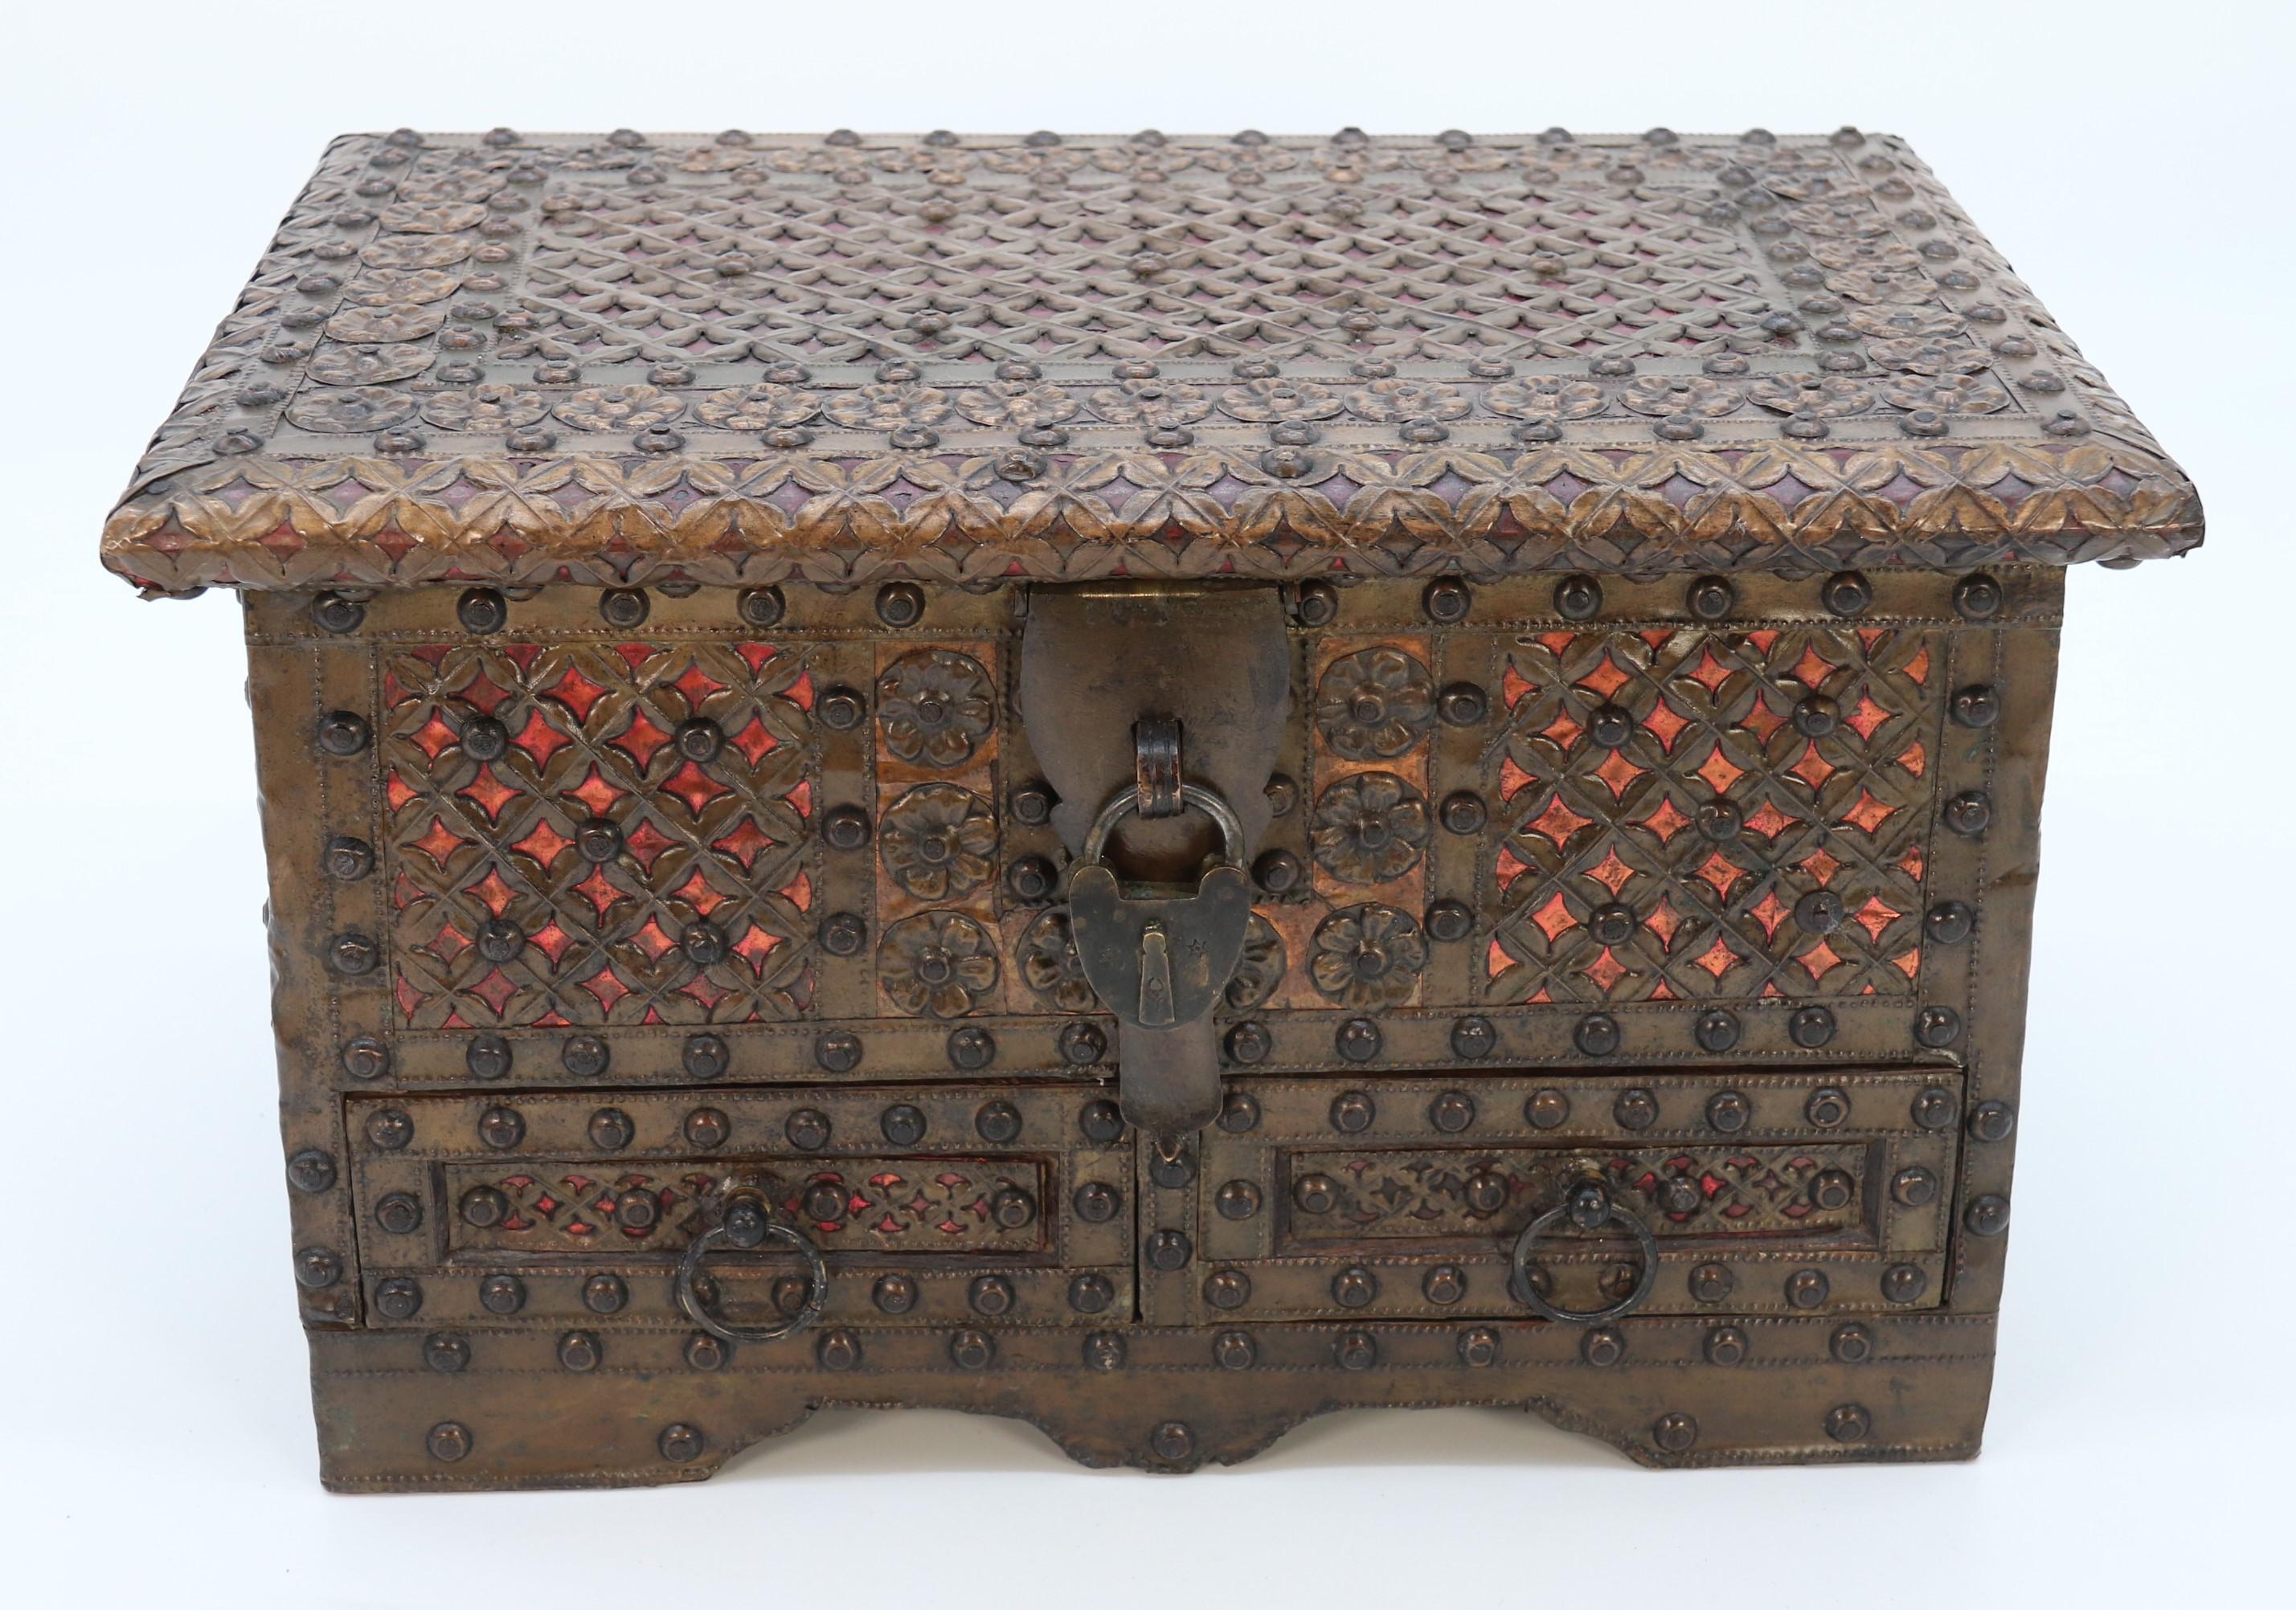 
This remarkable and small beautifully proportioned Zanzibar chest is a highly decorative piece made from a mixture of teak and other various woods. This sturdy little chest or strongbox Is very ornately mounted with pierced and embossed brass and